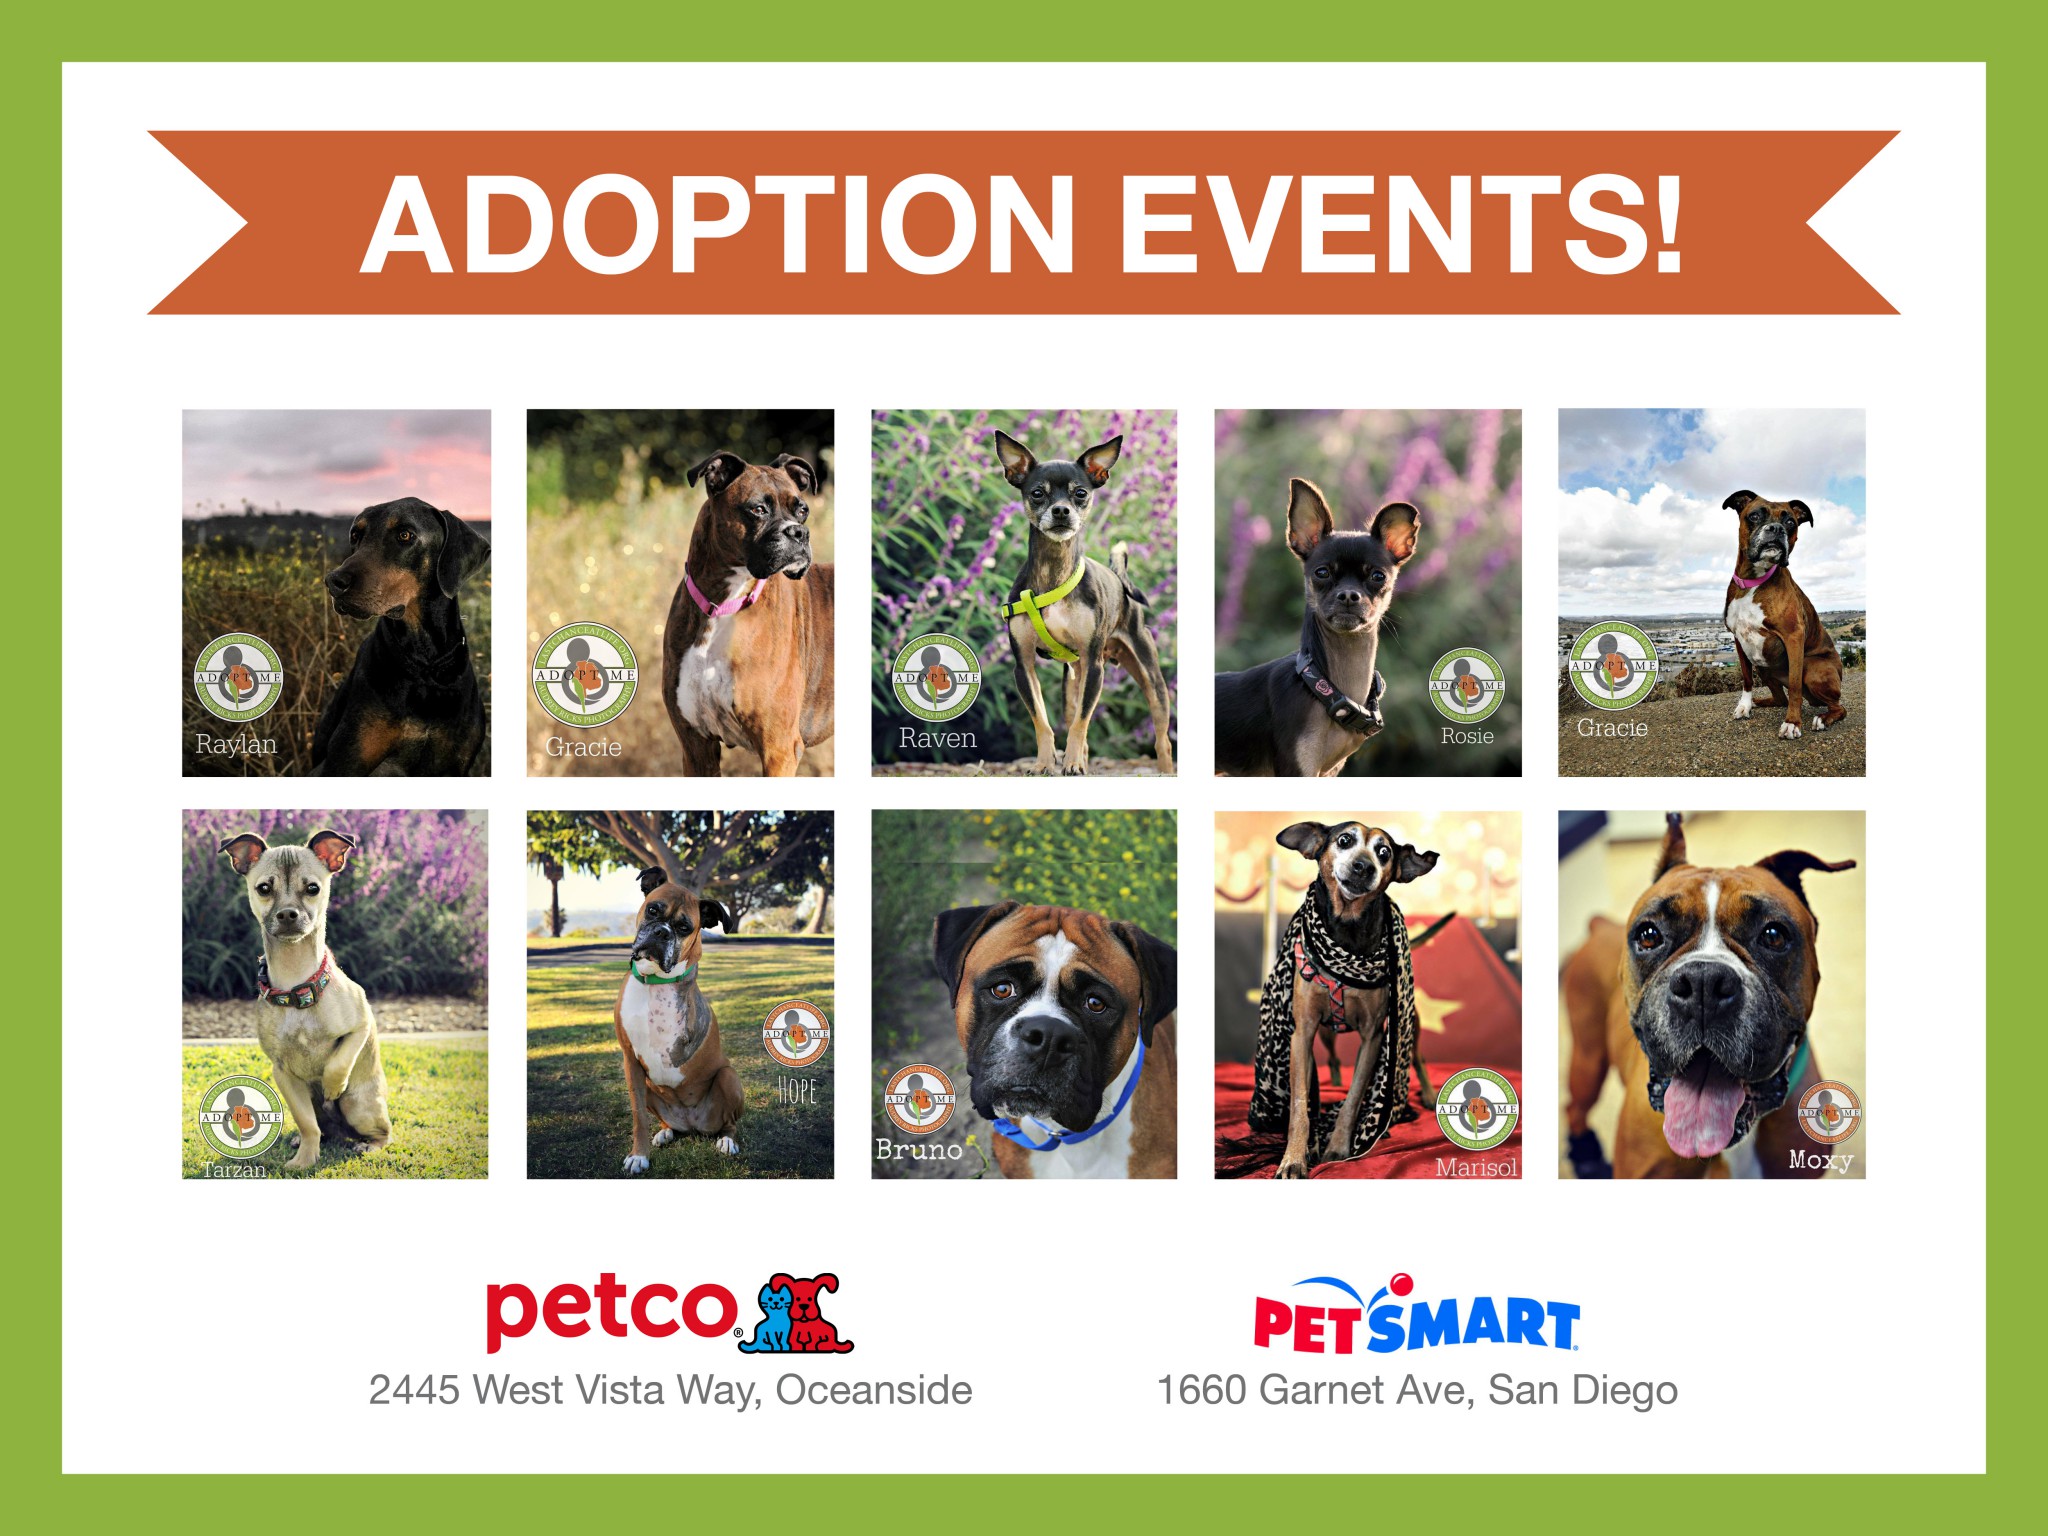 adoption events near me this weekend